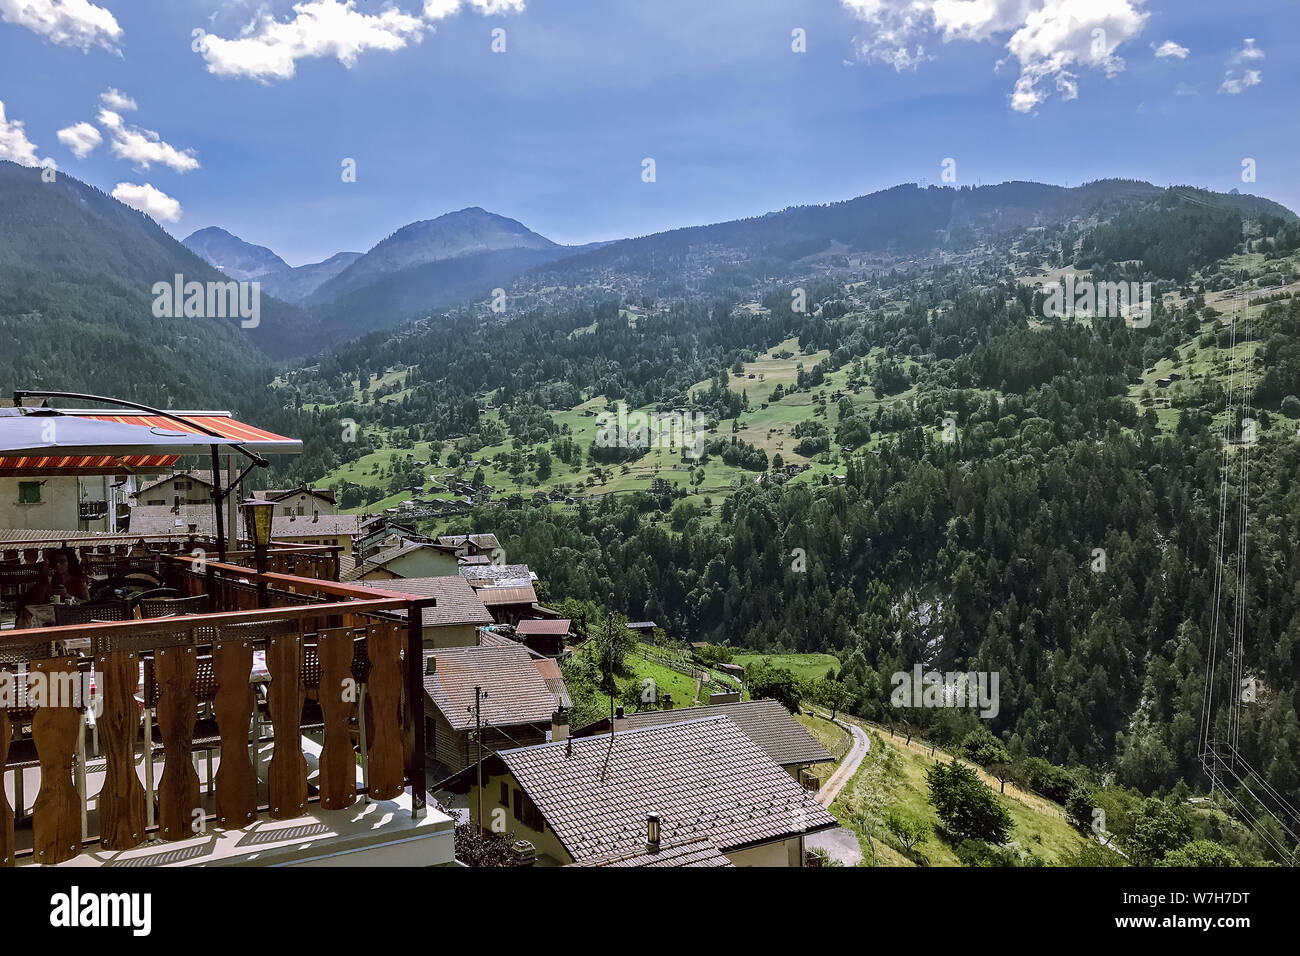 Terrace of a rustic cafe in the Swiss Alps overlooking wooded mountains against a blue sky. Stock Photo